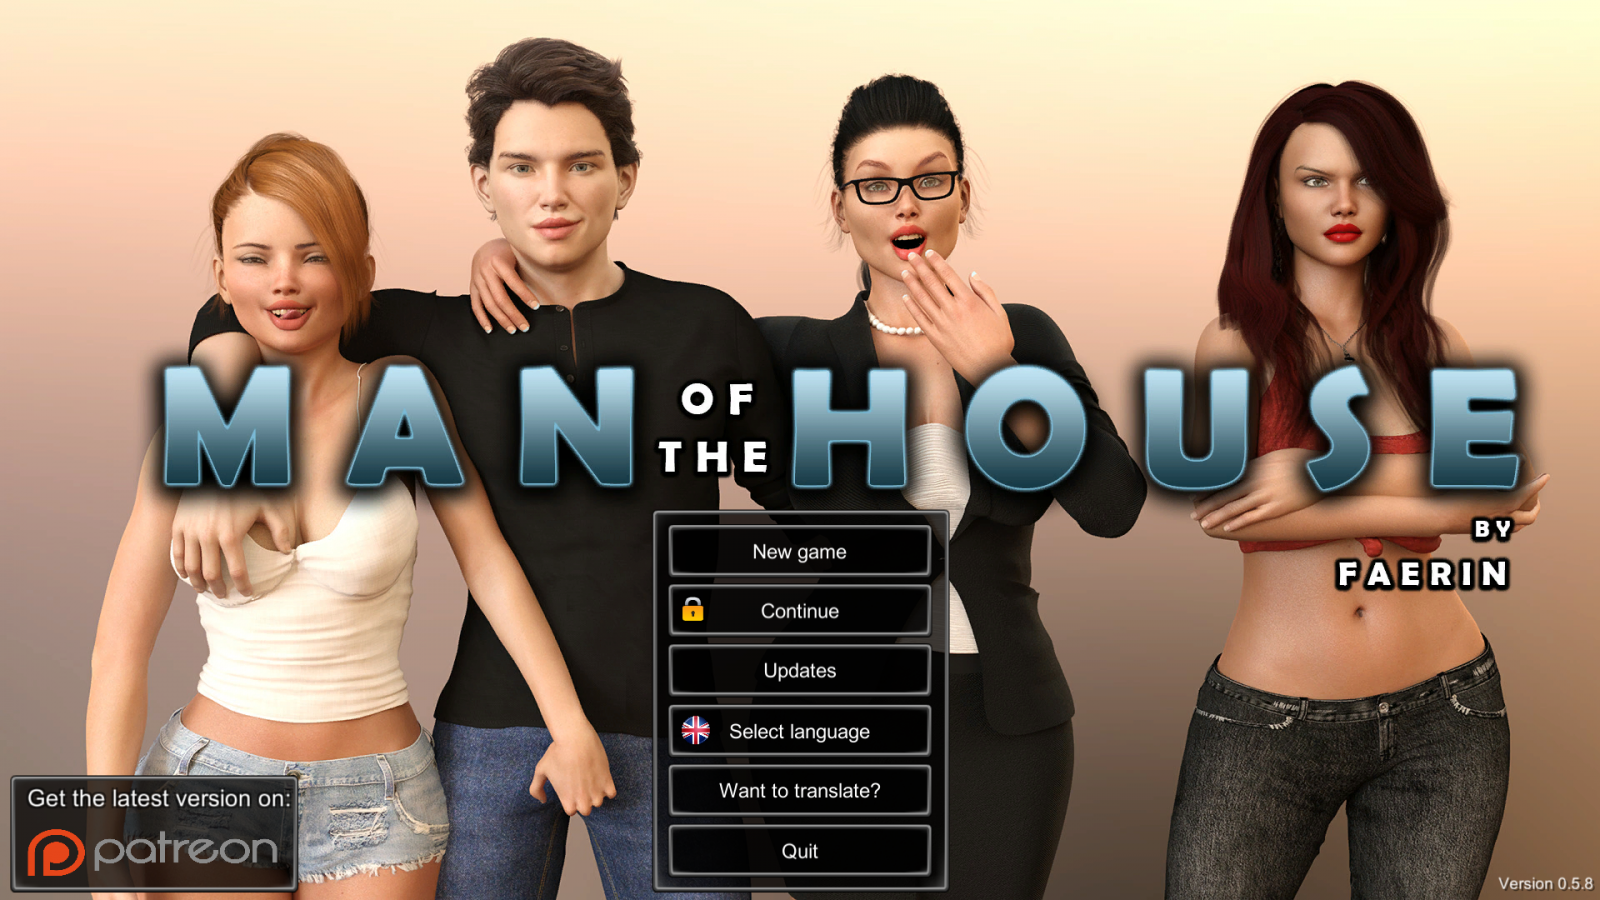 MAN OF THE HOUSE VERSION 0.7.1B+ EXTRA+INCEST PATCH BY FAERIN